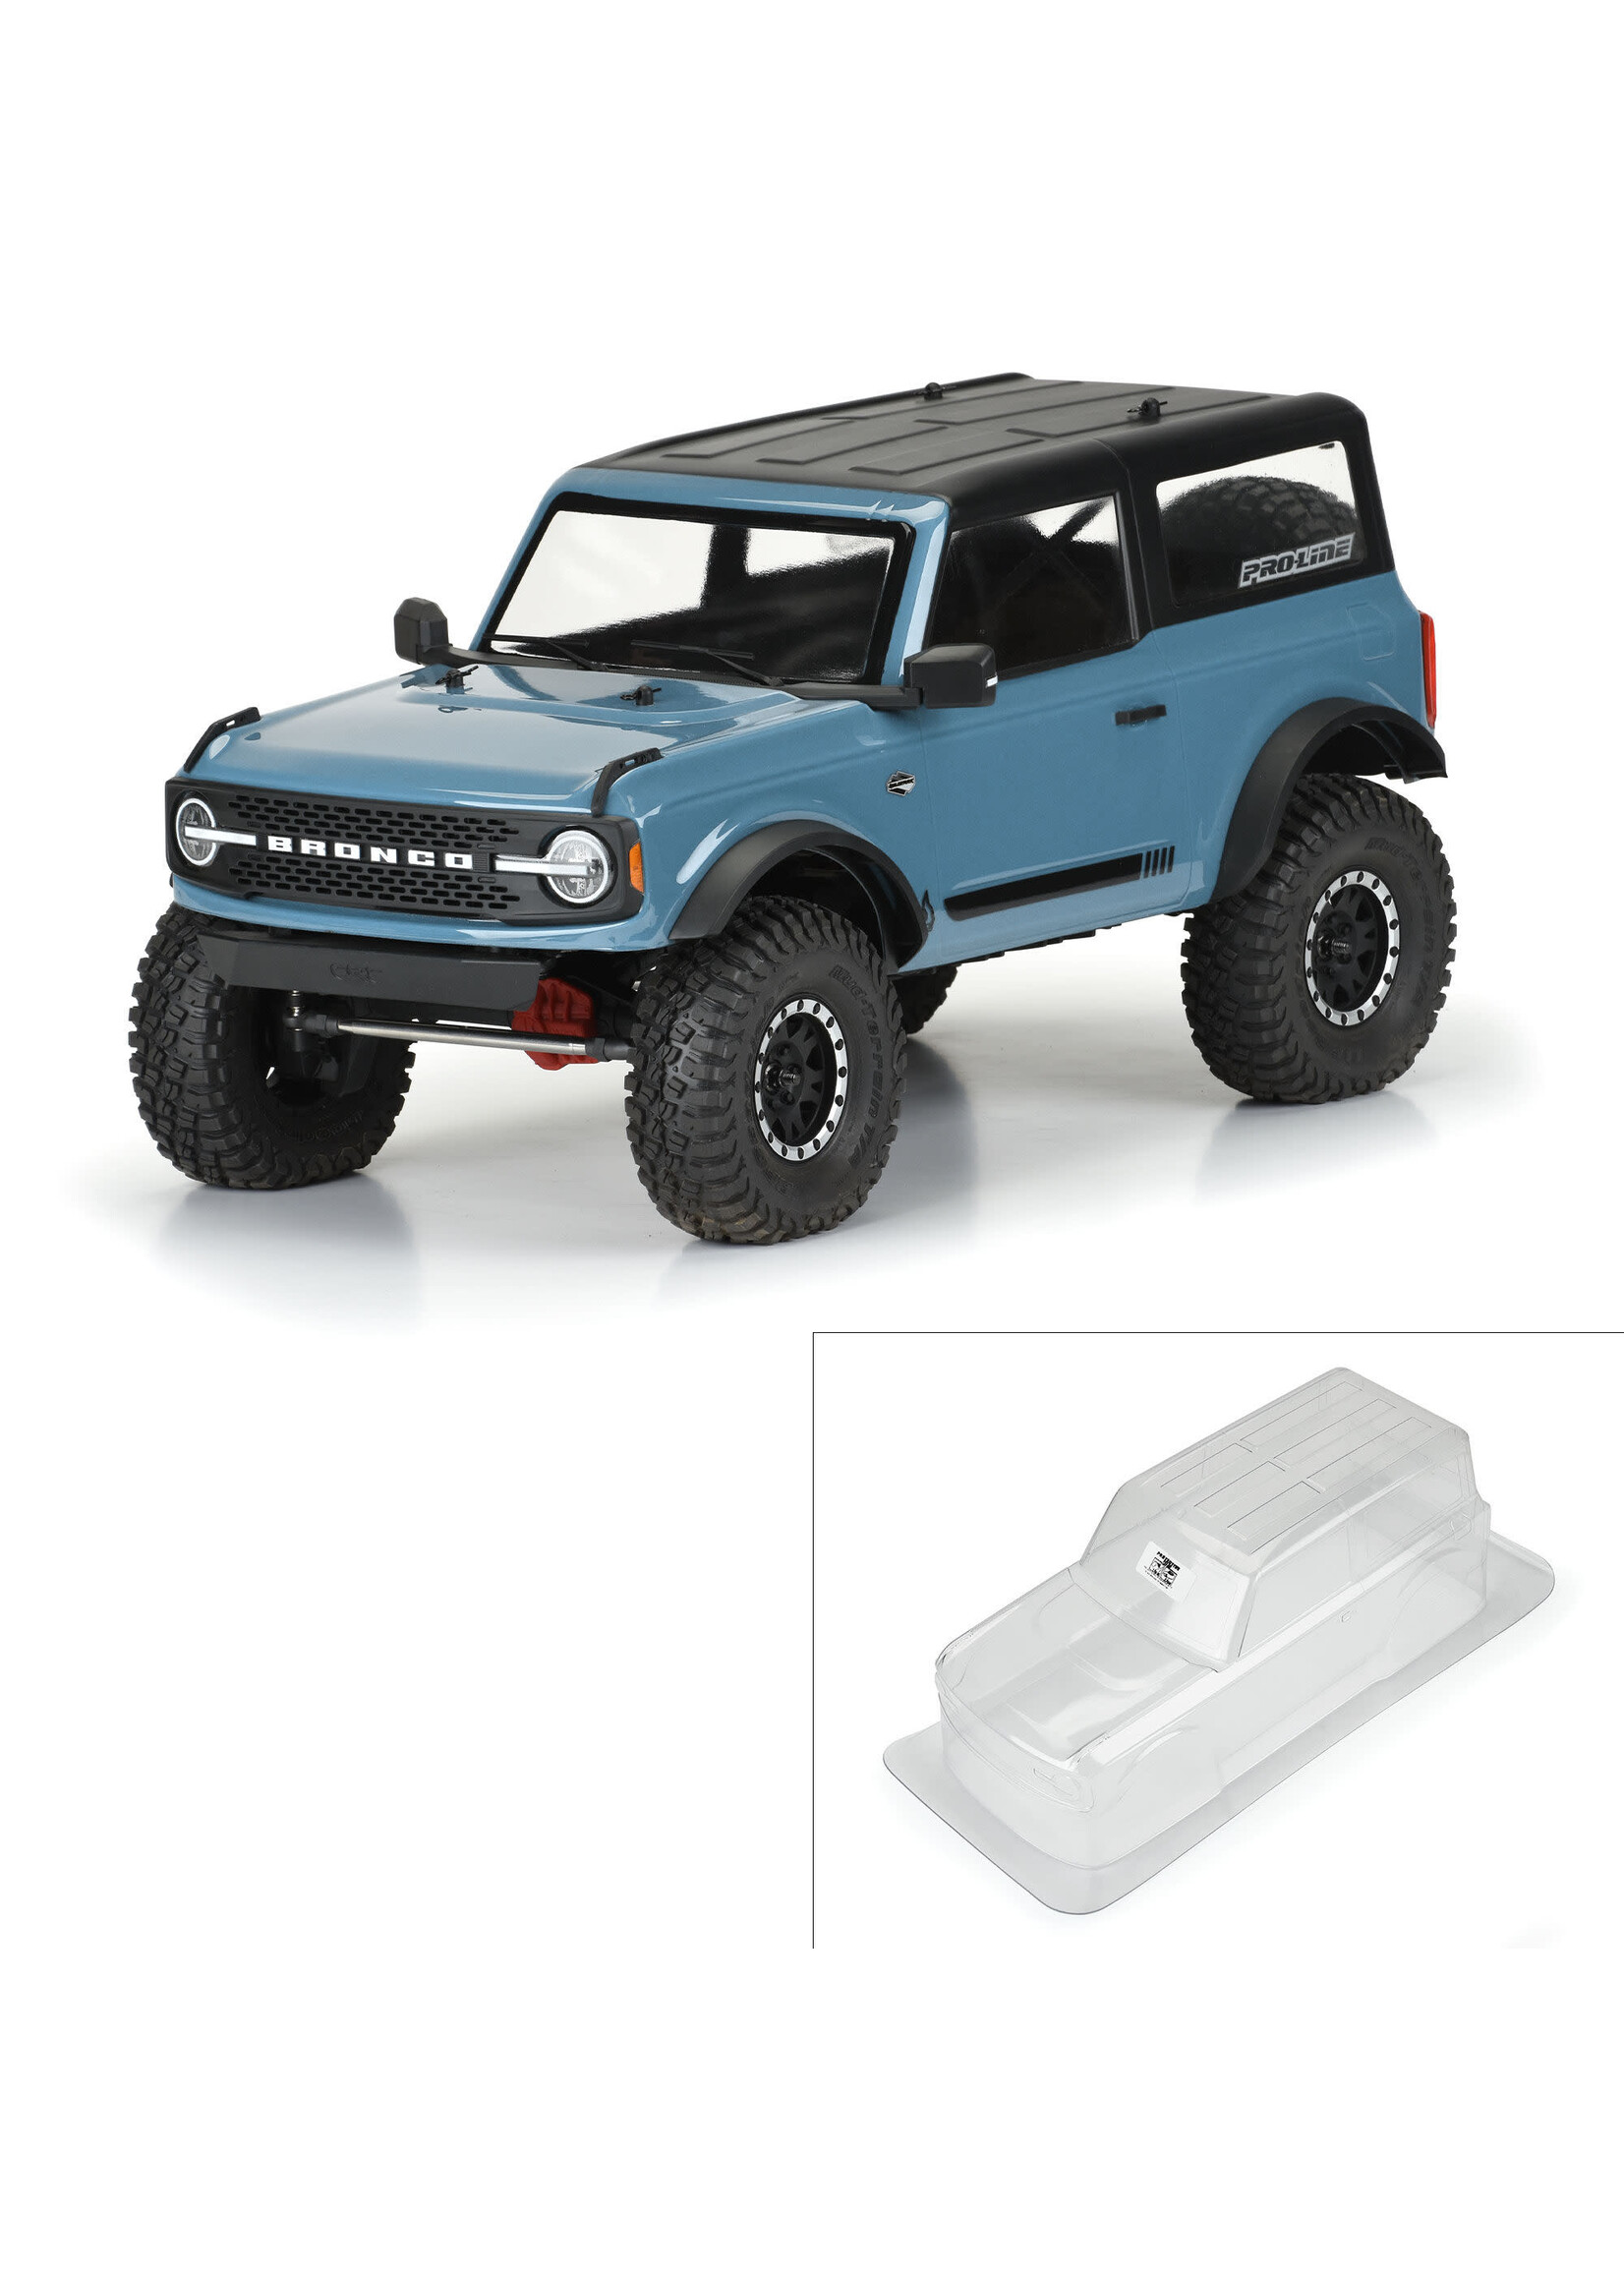 Pro-Line Racing PRO356900 Pro-Line 1/10 2021 Ford Bronco Clear Body Set 11.4" Wheelbase: Crawlers